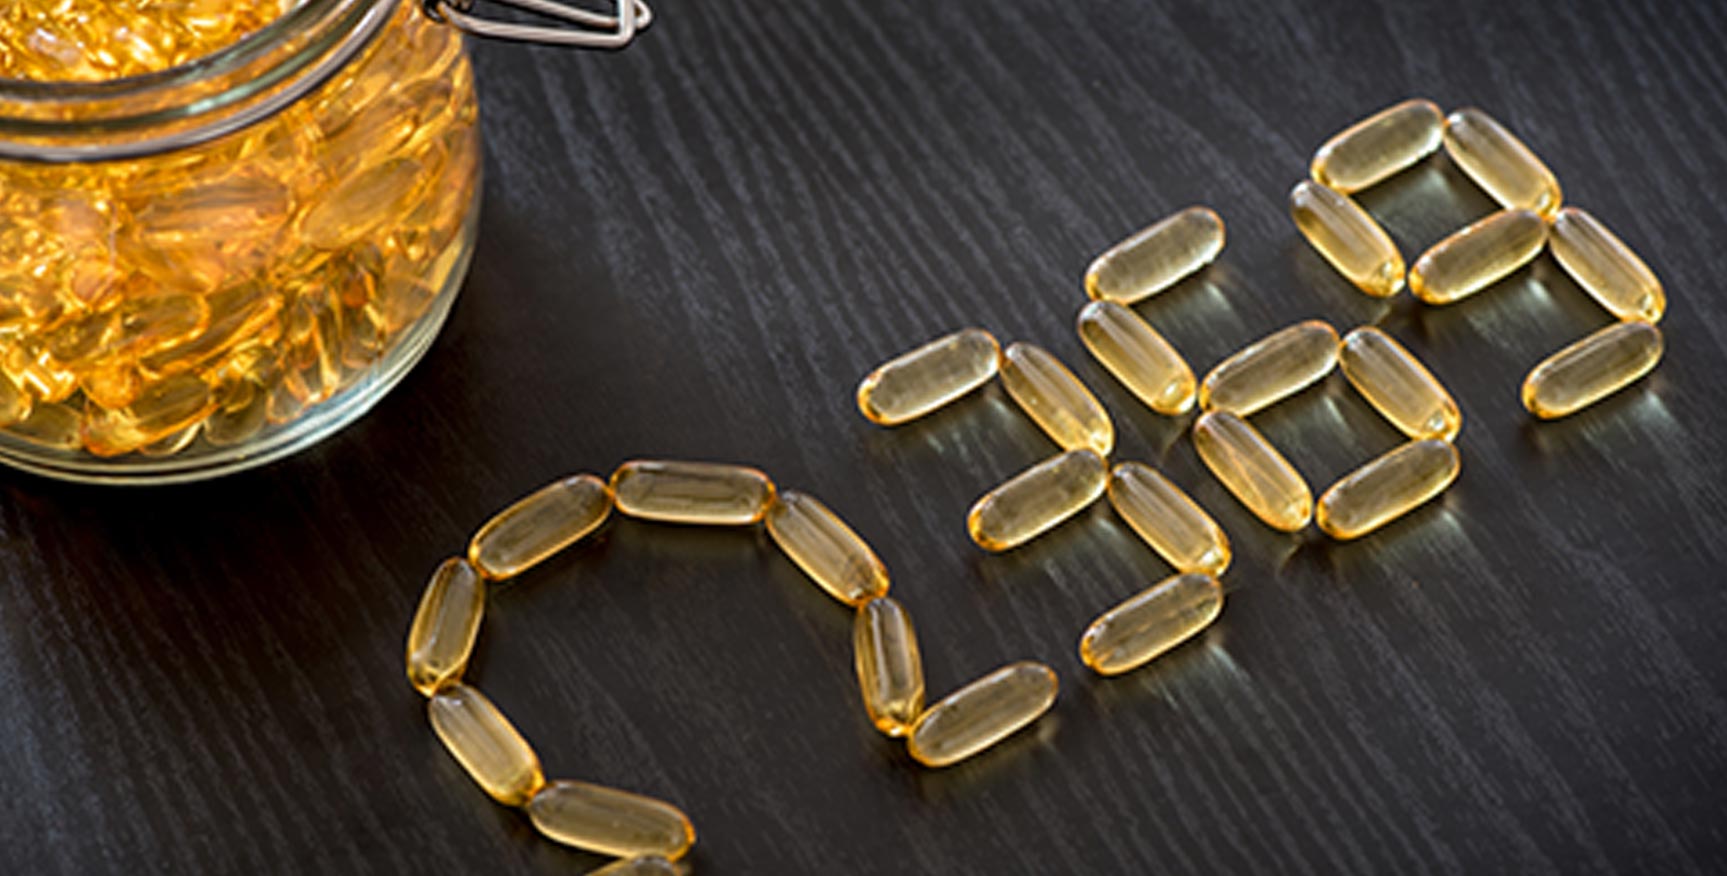 Find out the fascinating facts about our Optimum Omega 3 Fish Oil-Nutravita